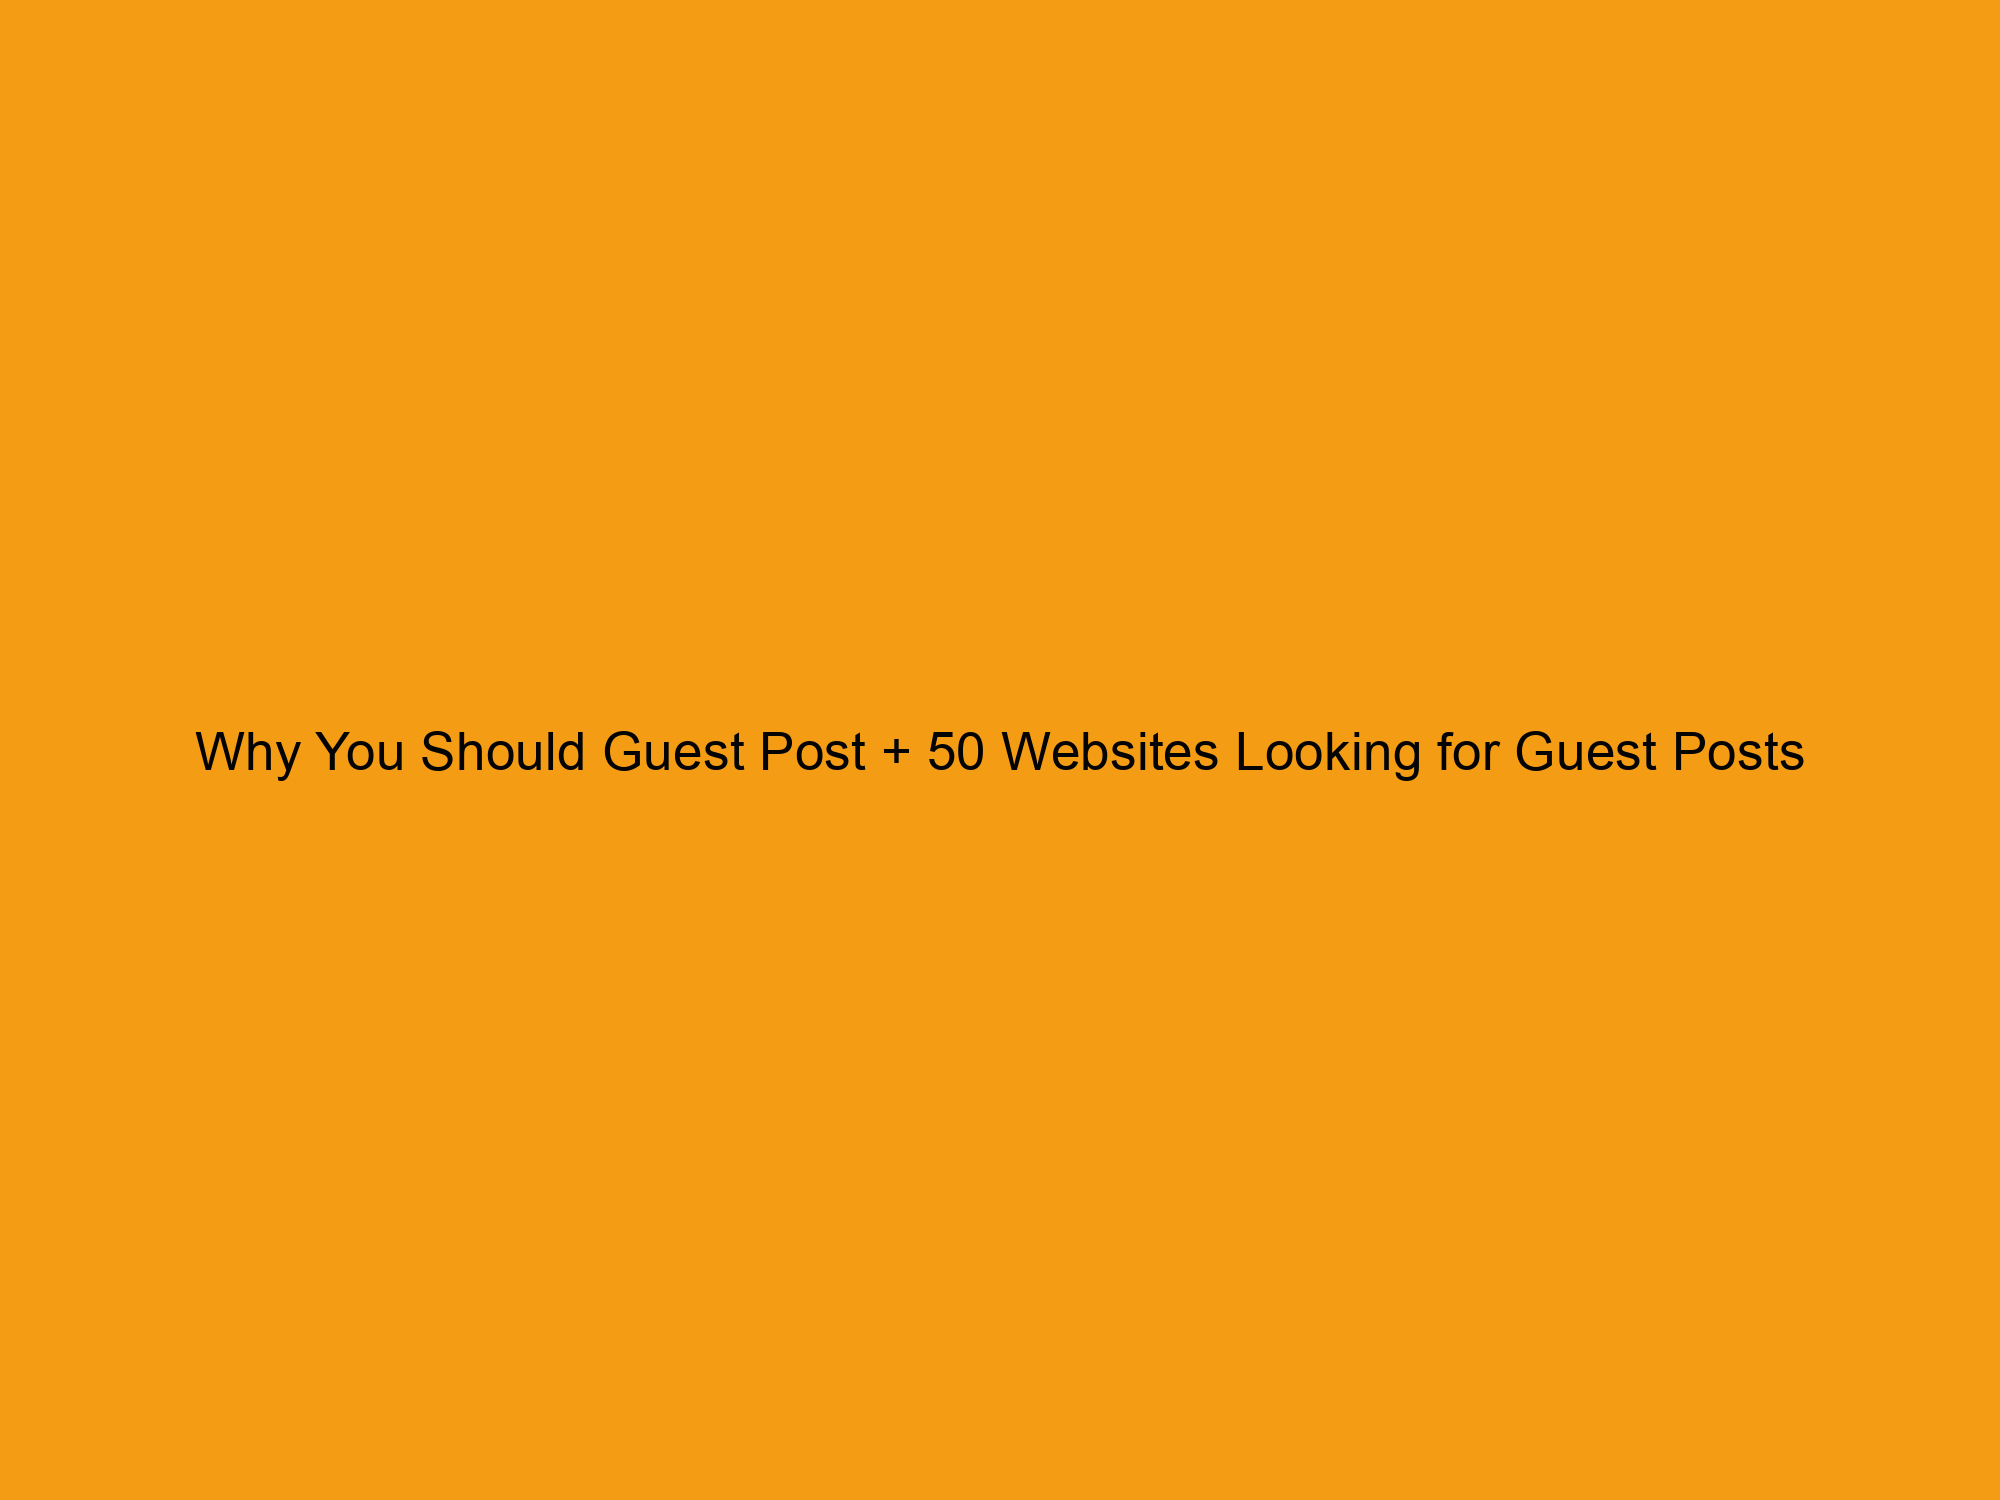 Why You Should Guest Post + 50 Websites Looking for Guest Posts